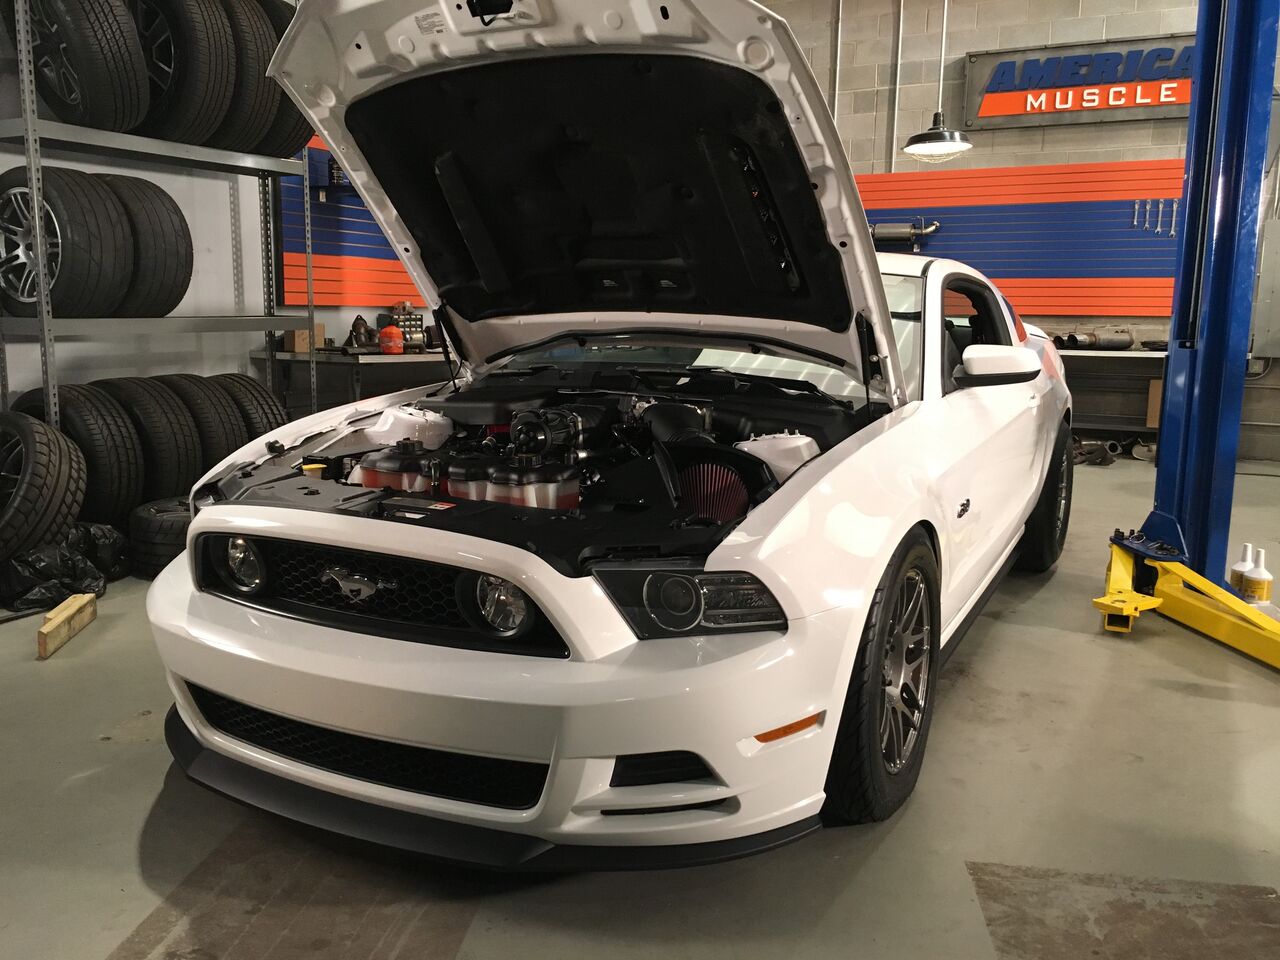 American Muscle's Roush-Supercharged 2014 Mustang GT